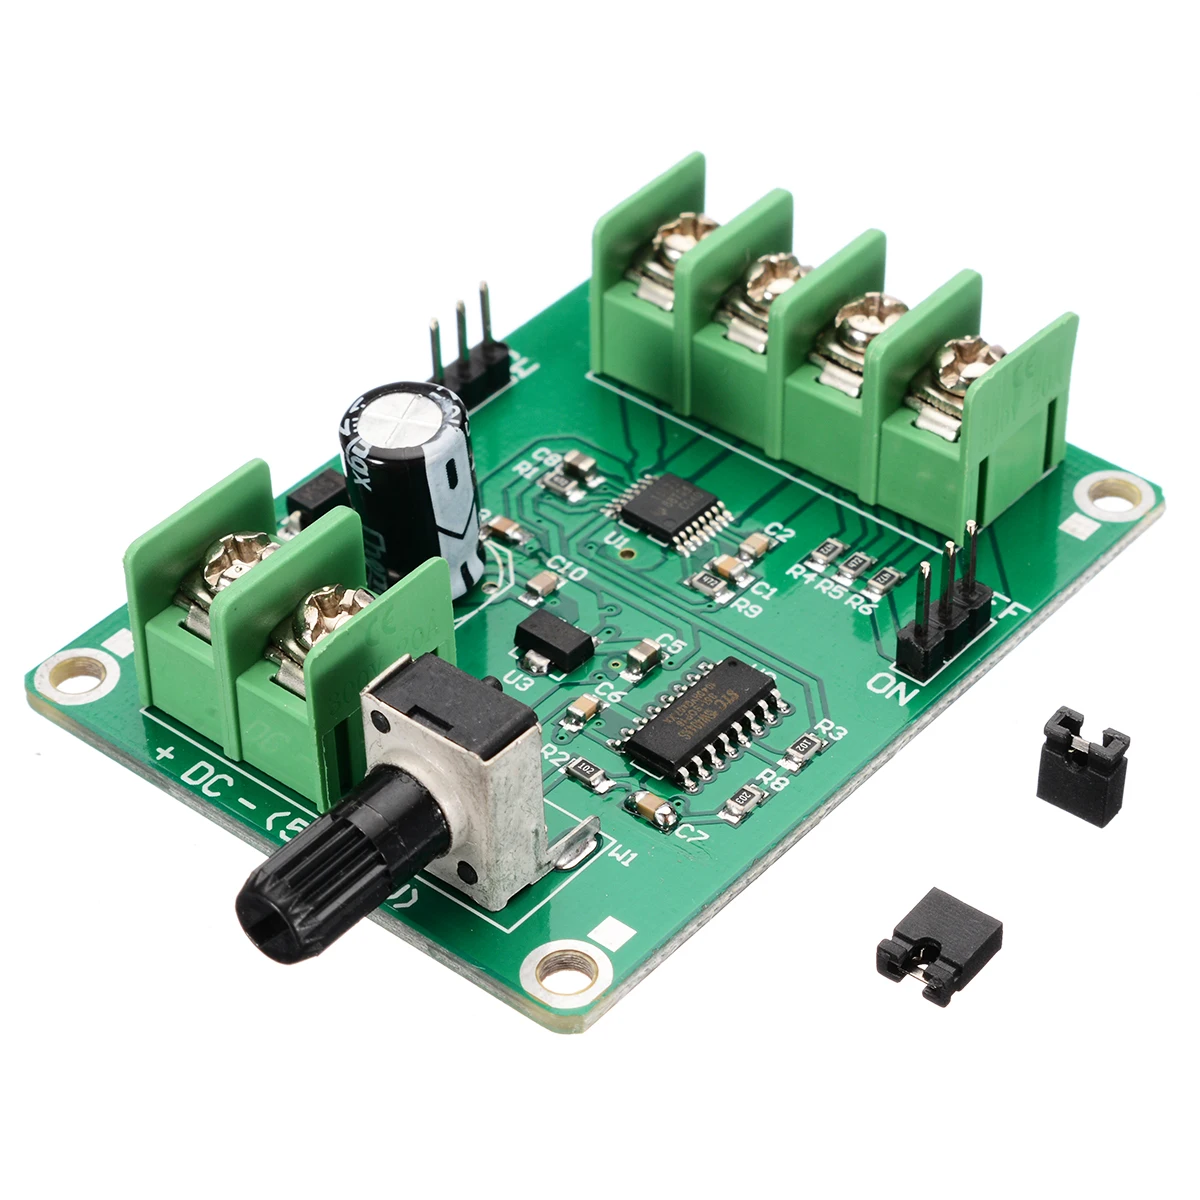 DC 5V-12V 1.2A 3/4 Wire DC Brushless Motor Driver Board Speed Controller Module 